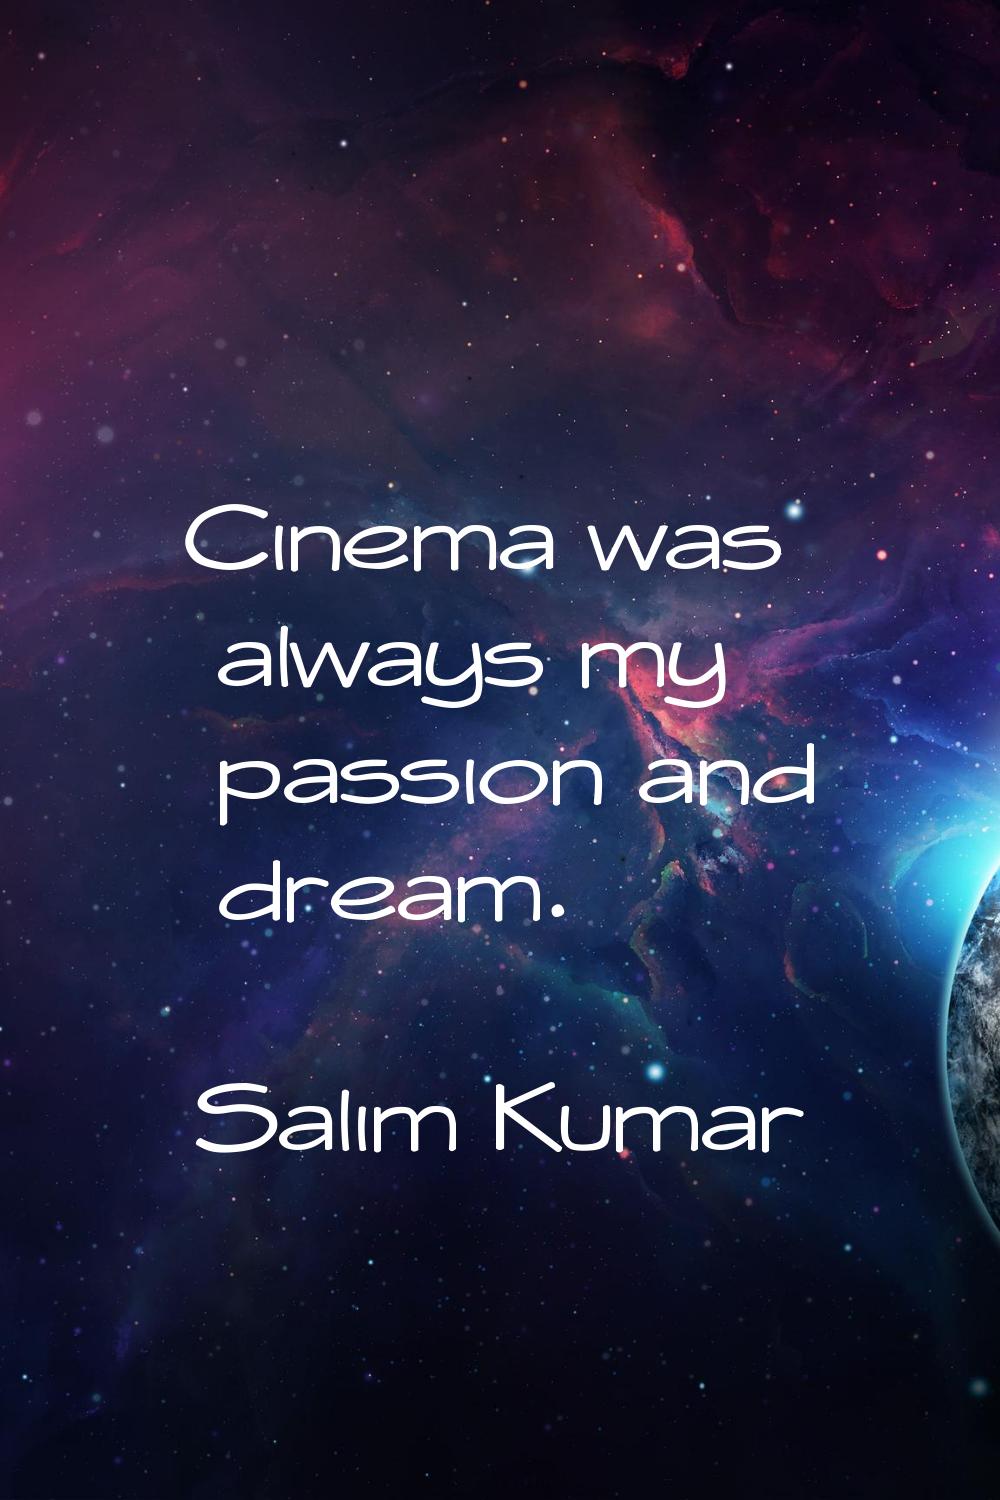 Cinema was always my passion and dream.